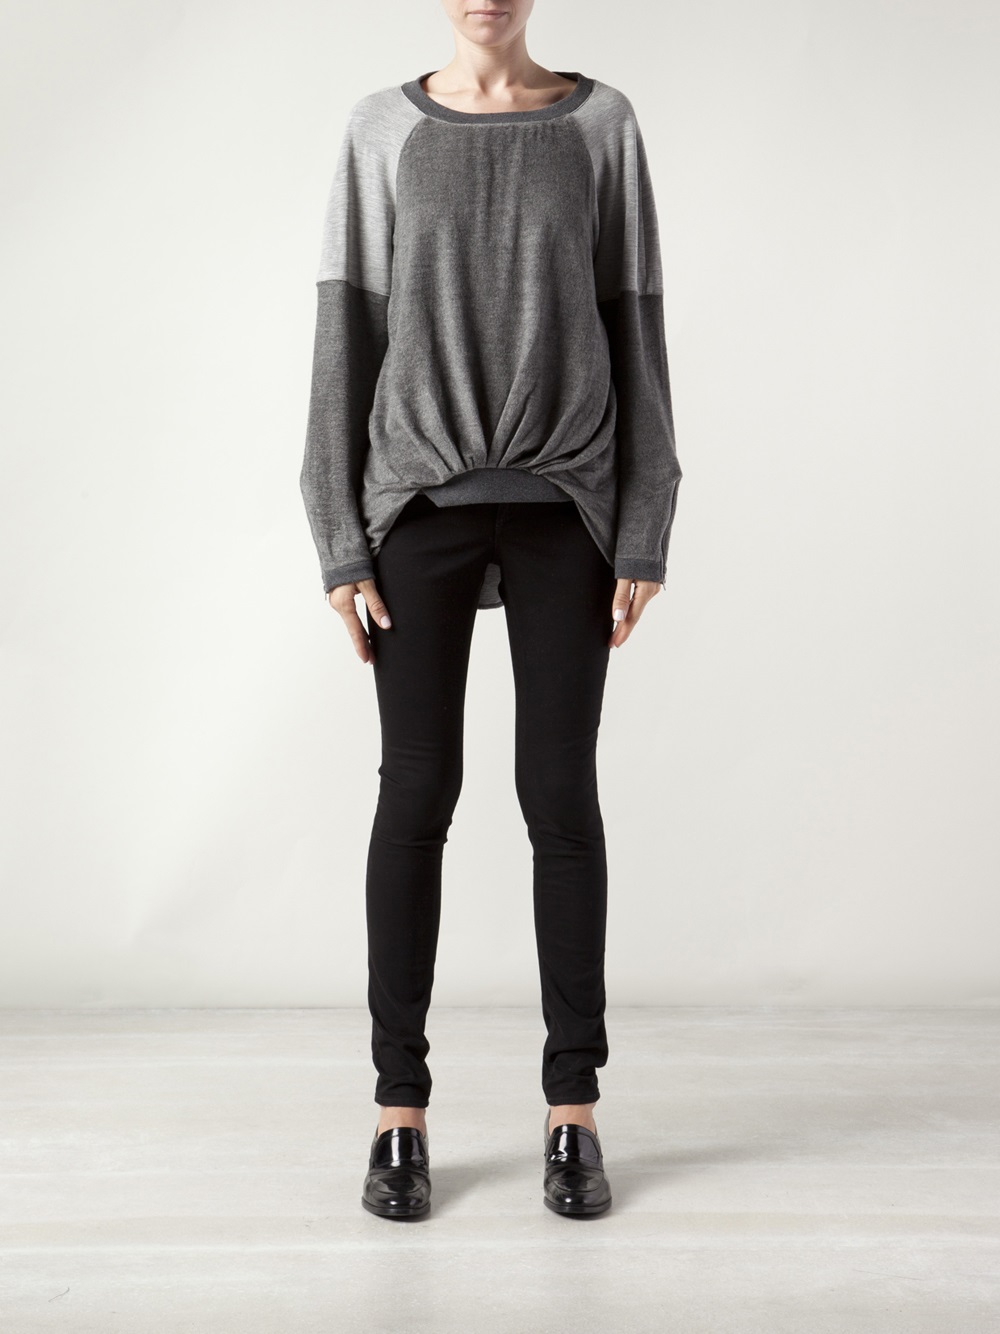 Lyst - Elizabeth and james Alston Sweater in Gray